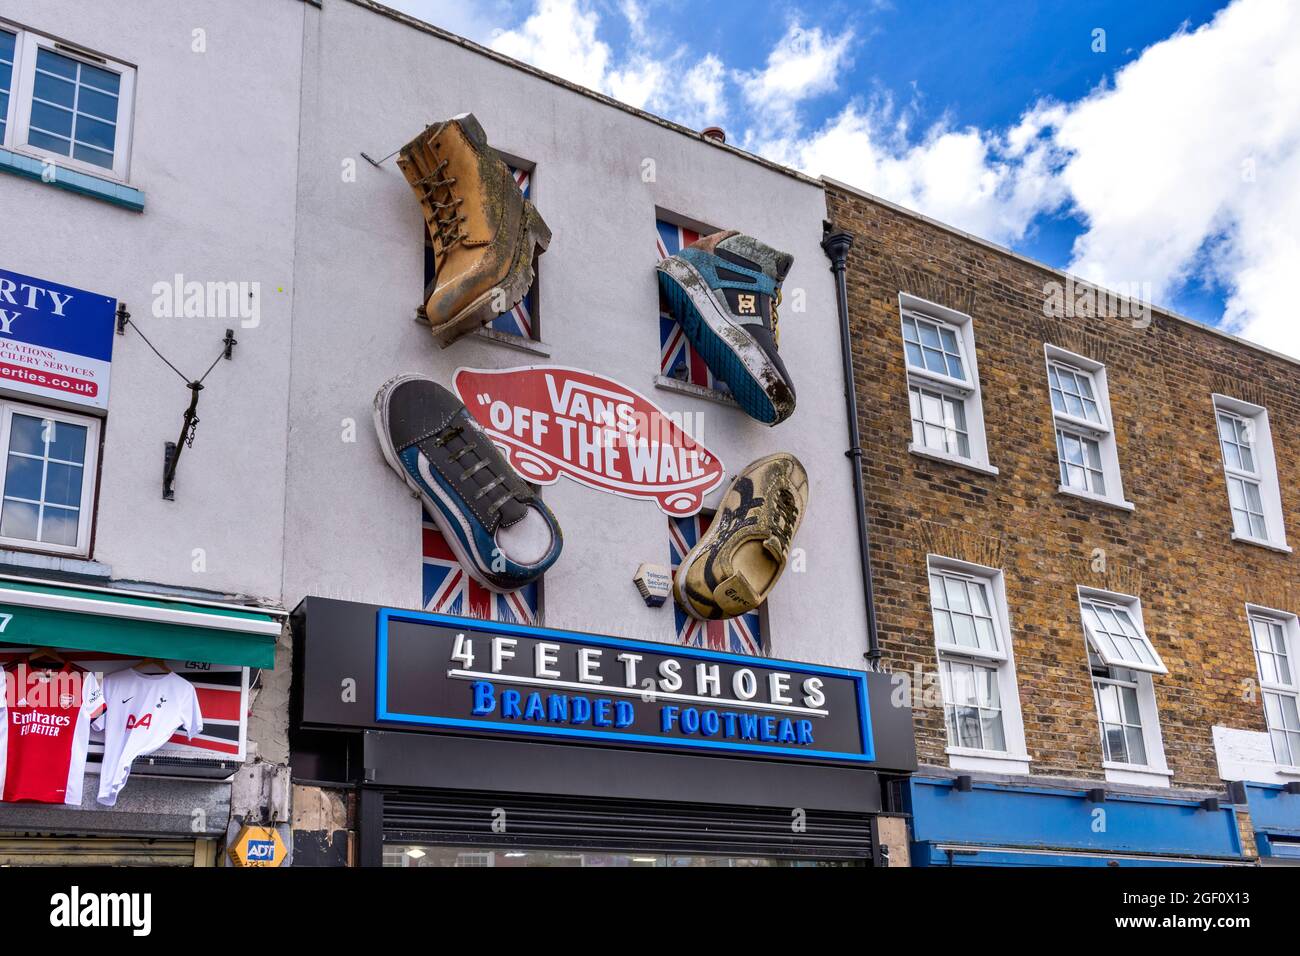 LONDON CAMDEN LOCK CAMDEN TOWN THE HIGH STREET 4 FEET SHOES BOOTS AND SHOES  ON THE BUILDING Stock Photo - Alamy